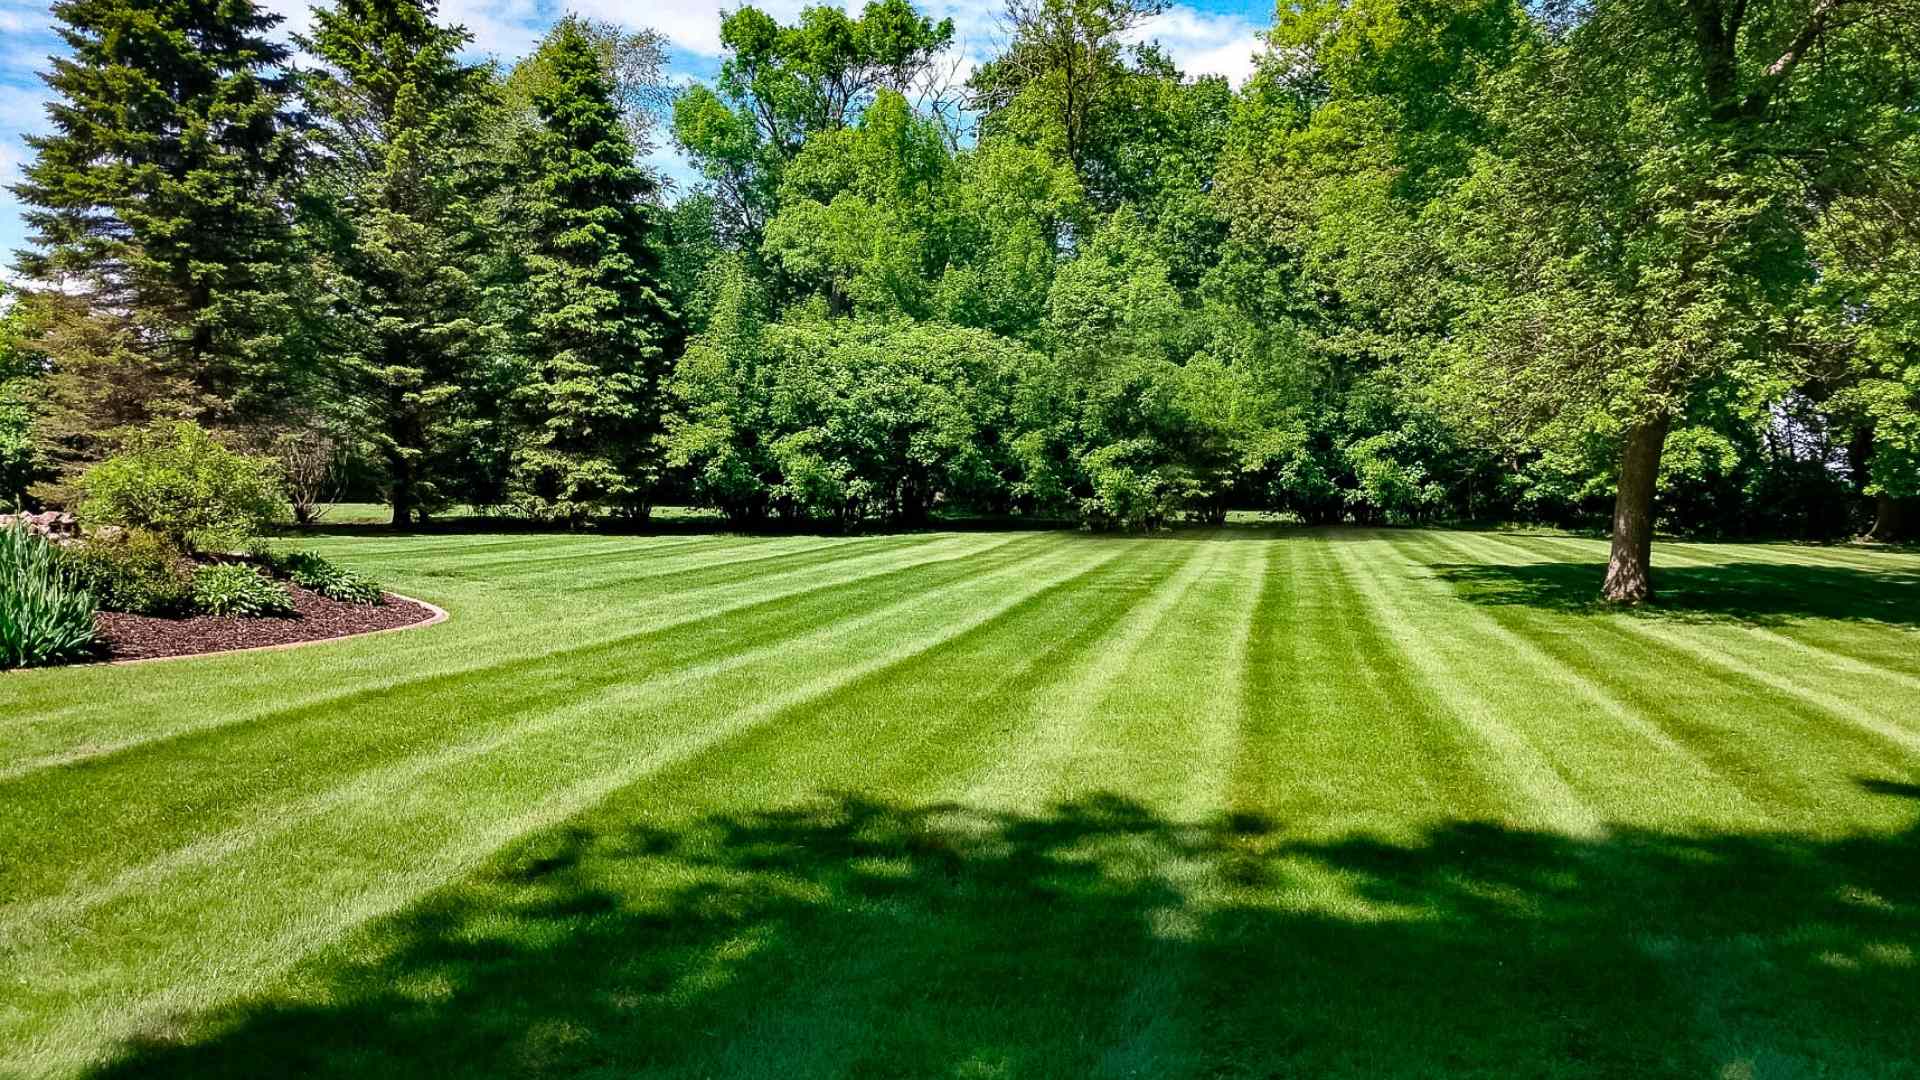 Freshly mowed lawn with patterns in Mankato, MN.